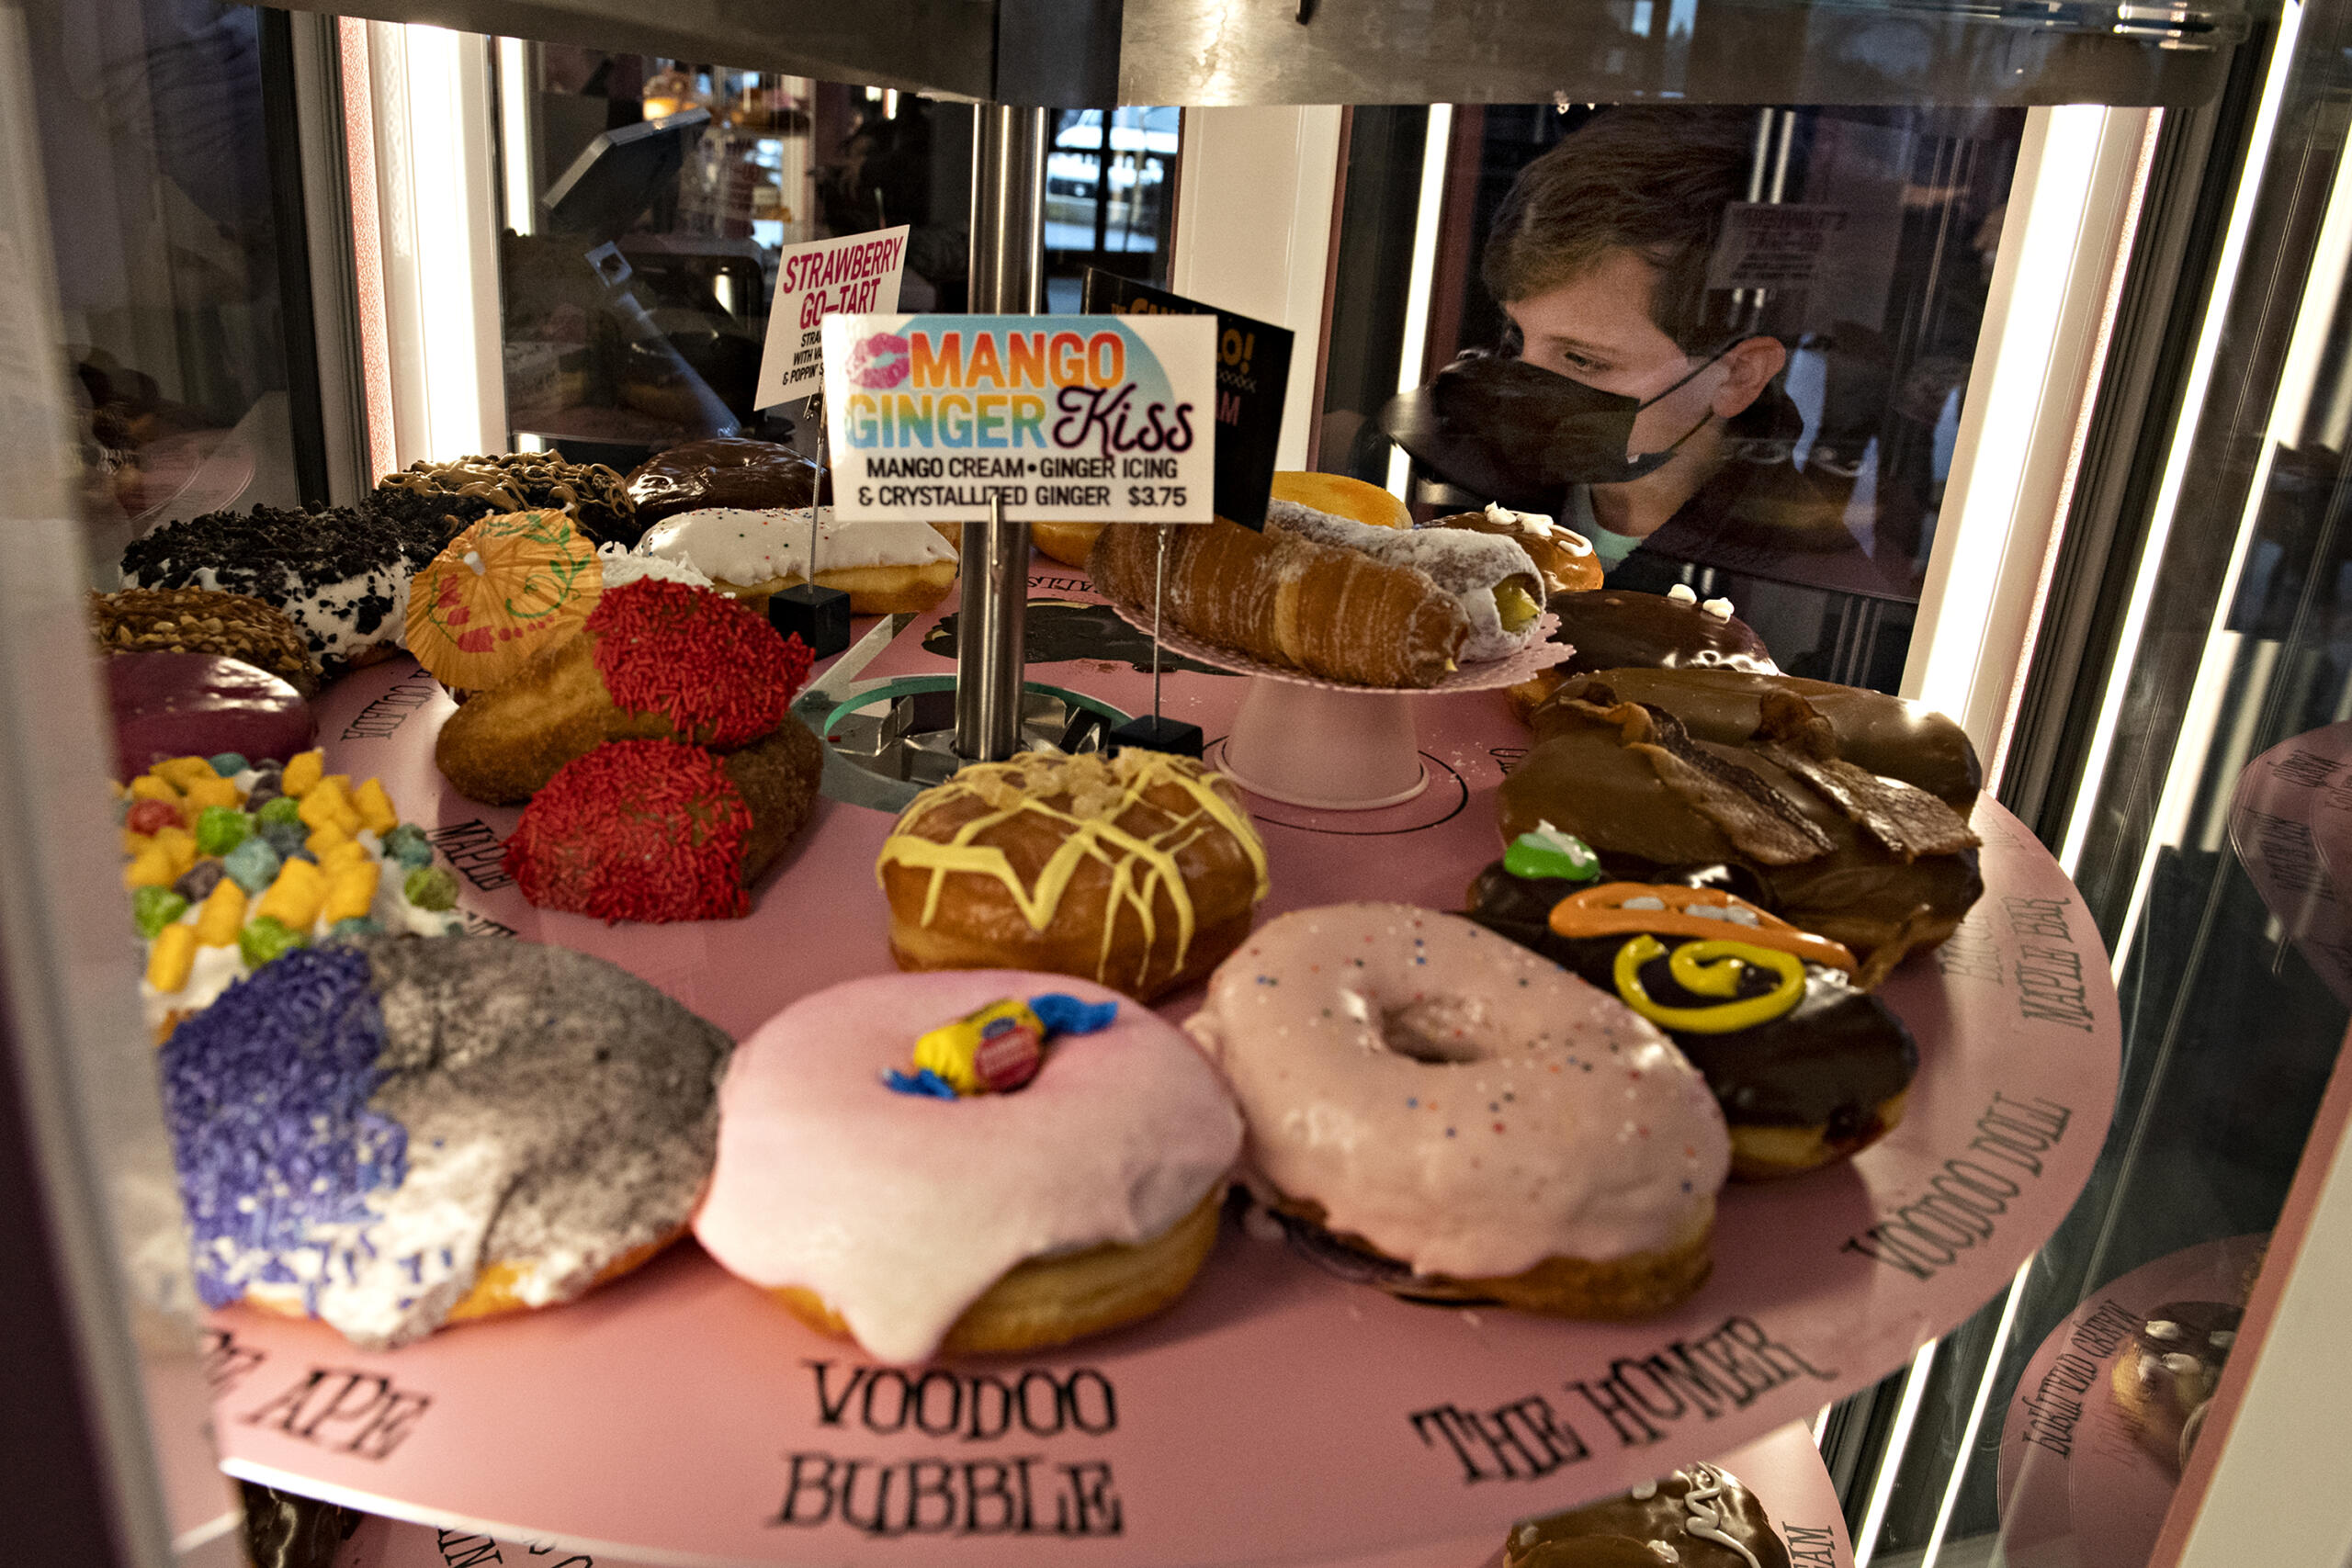 Ridgefield resident James Tobin, 8, tries to decide which doughnut to get while looking over the selection at the new Voodoo Doughnut at Vancouver Mall on Tuesday morning, Jan.11, 2022.